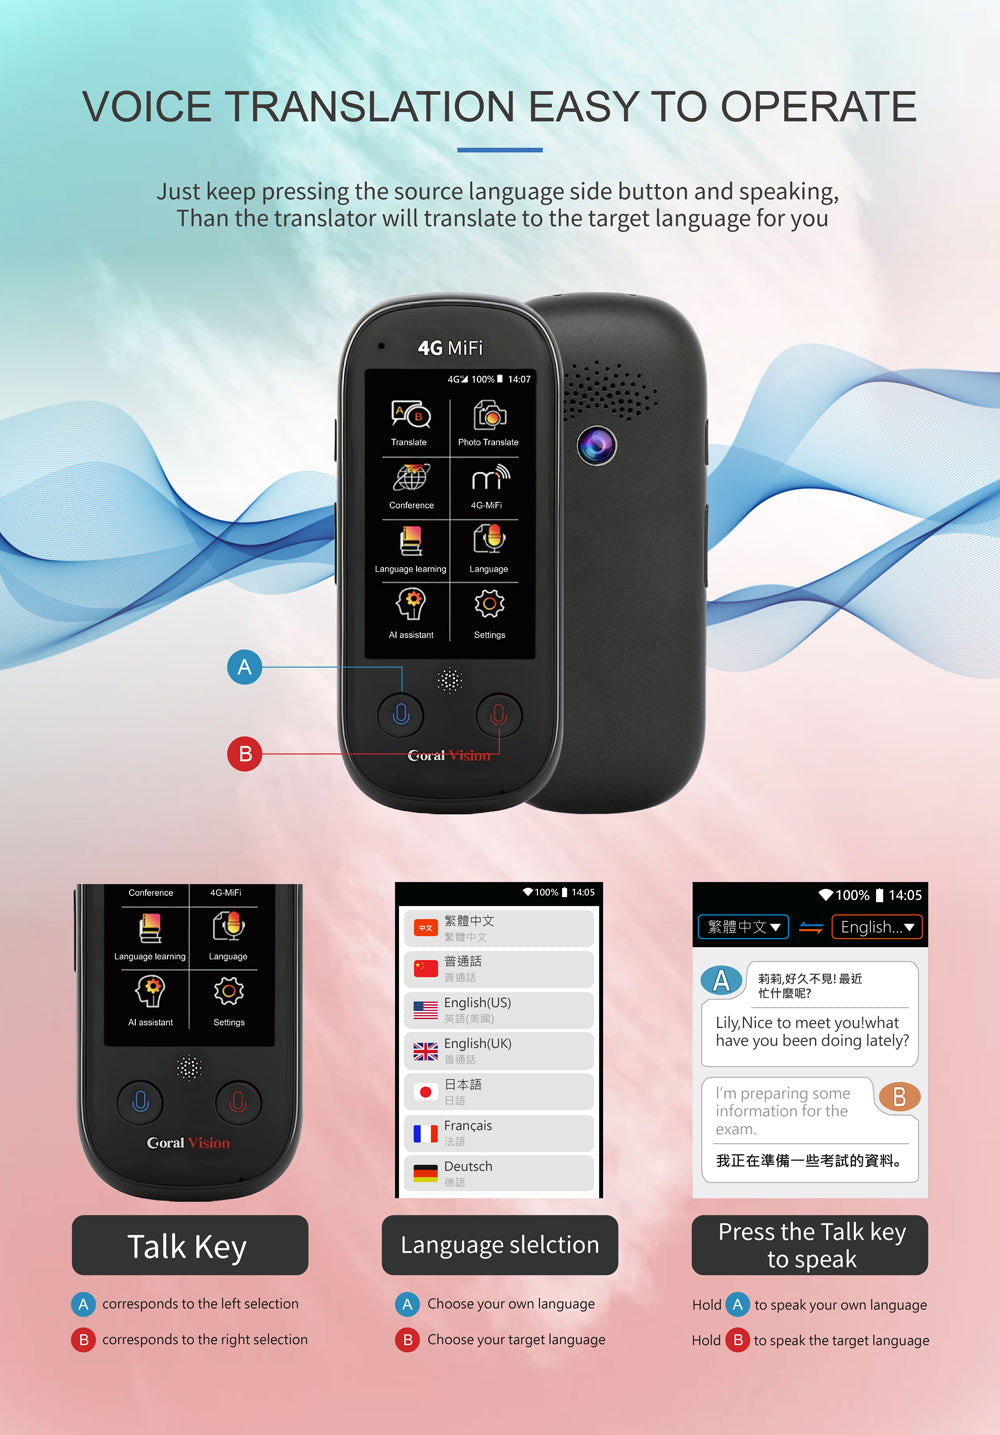 Coral Vision UN5 WiFi / 4G language translator converter supports 117 languages Photo translation in 43 languages